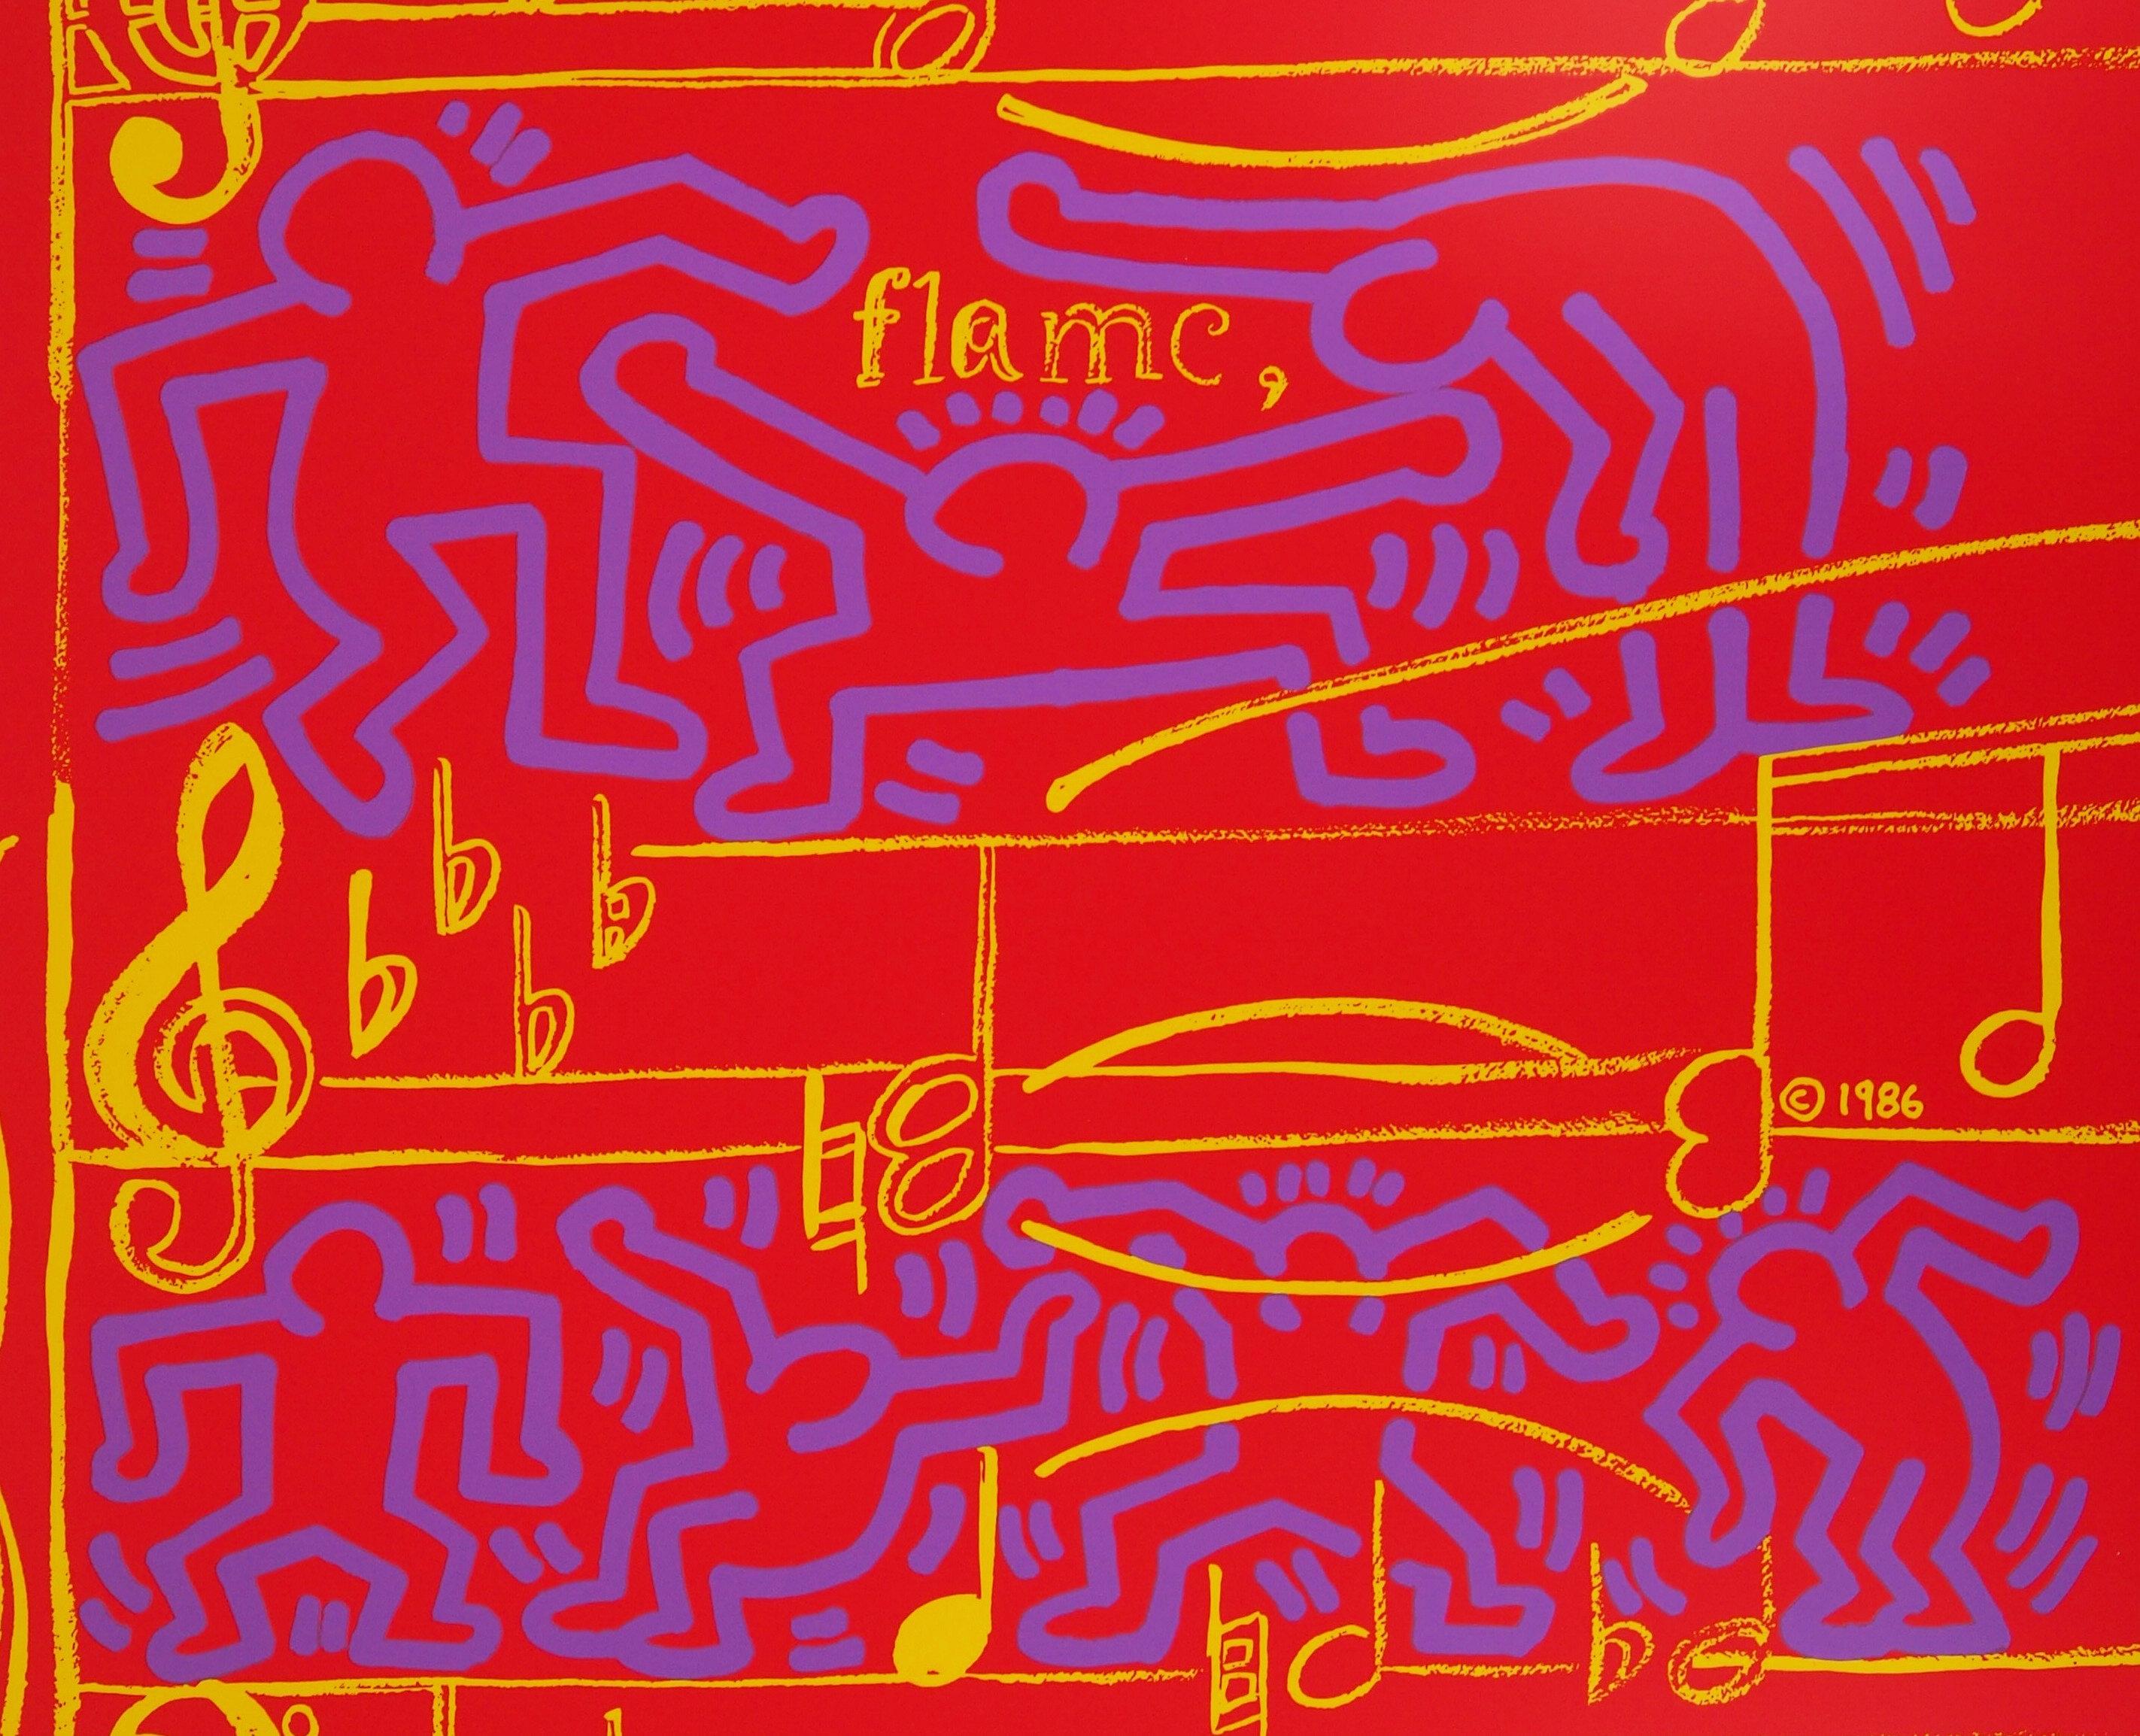 Andy WARHOL and Keith HARING
Jazz, Dancing on Music Sheet, 1986

Screenprint
Printed signature in the plate
On heavy paper 100 x 70 cm (c. 40 x 28 in)
Created by Haring for the Montreux Jazz Festival - vintage edition

Excellent condition